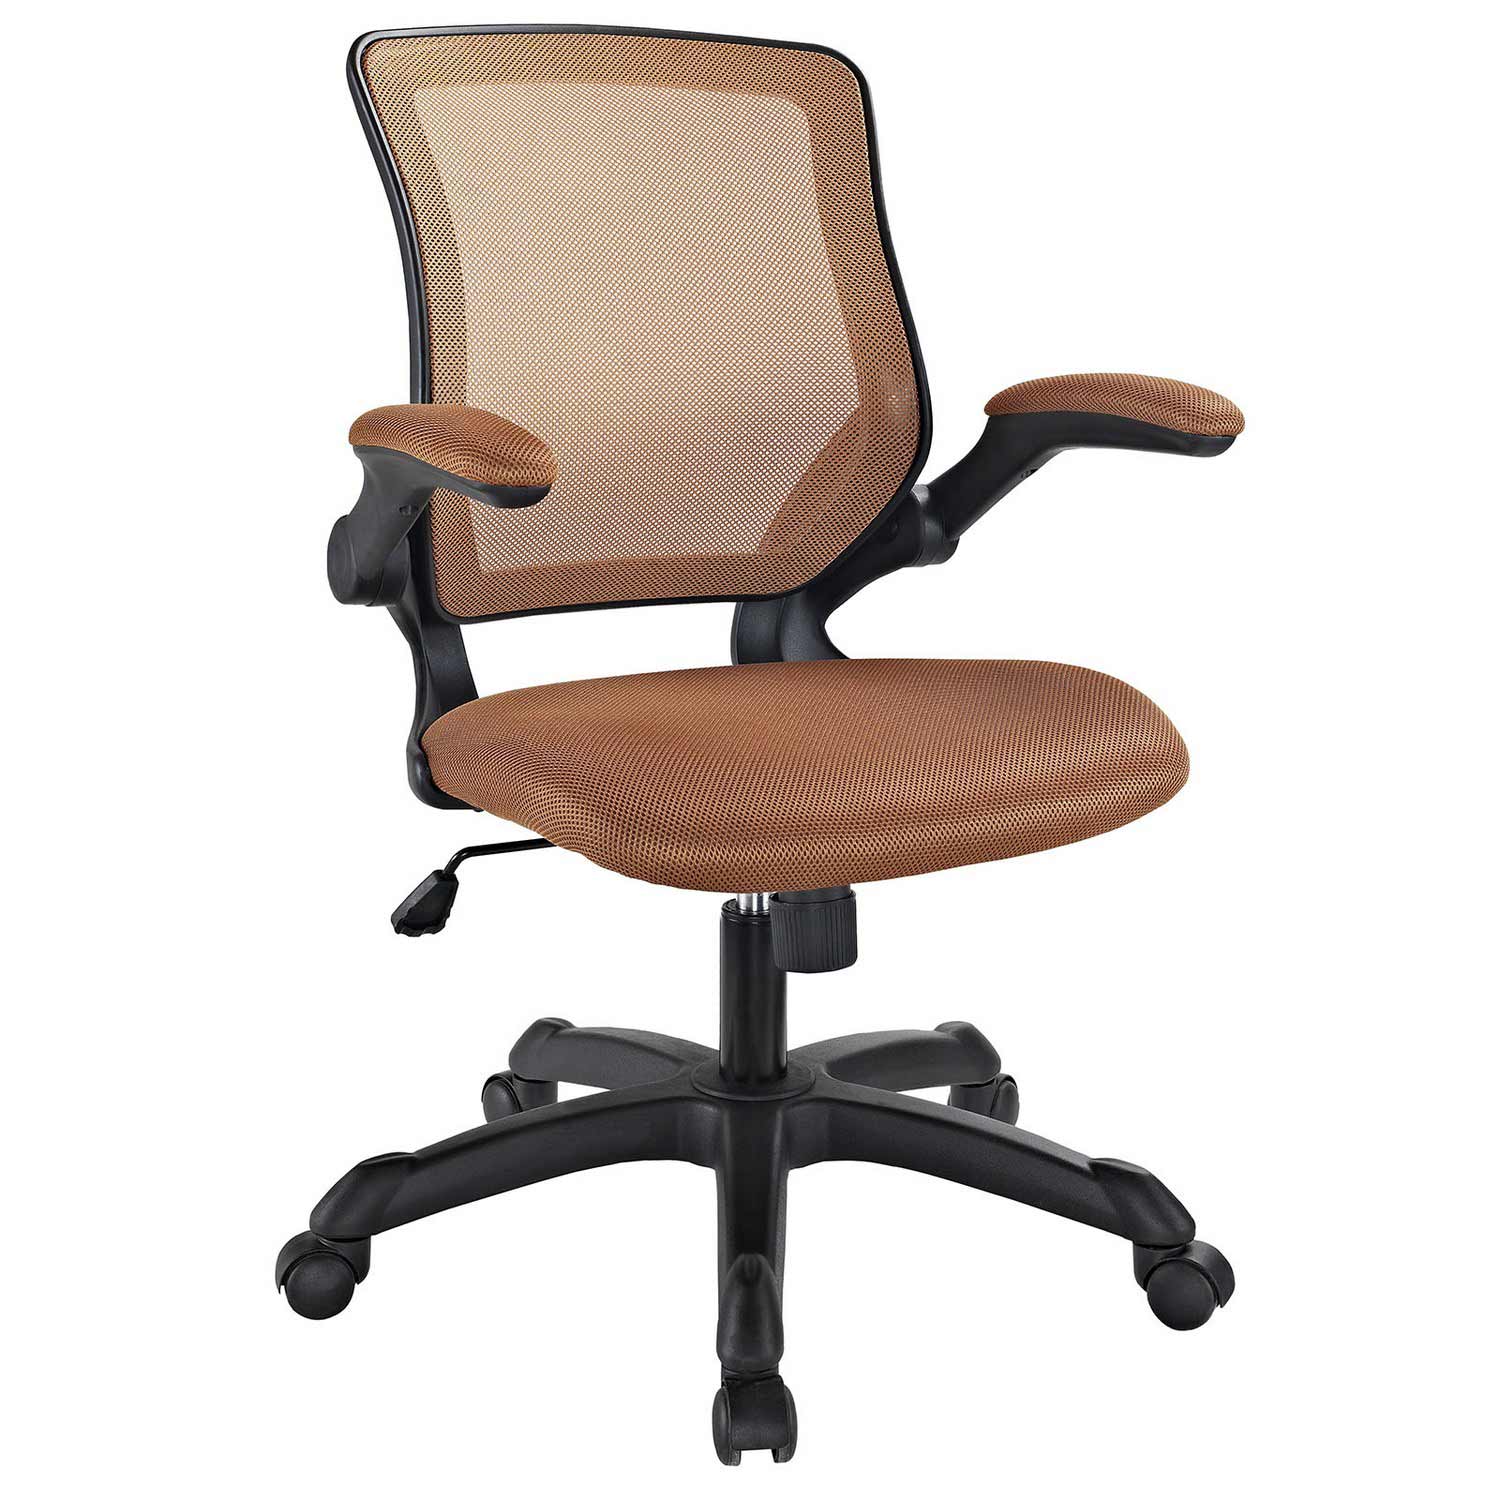 Modway Veer Mesh Office Chair - Tan